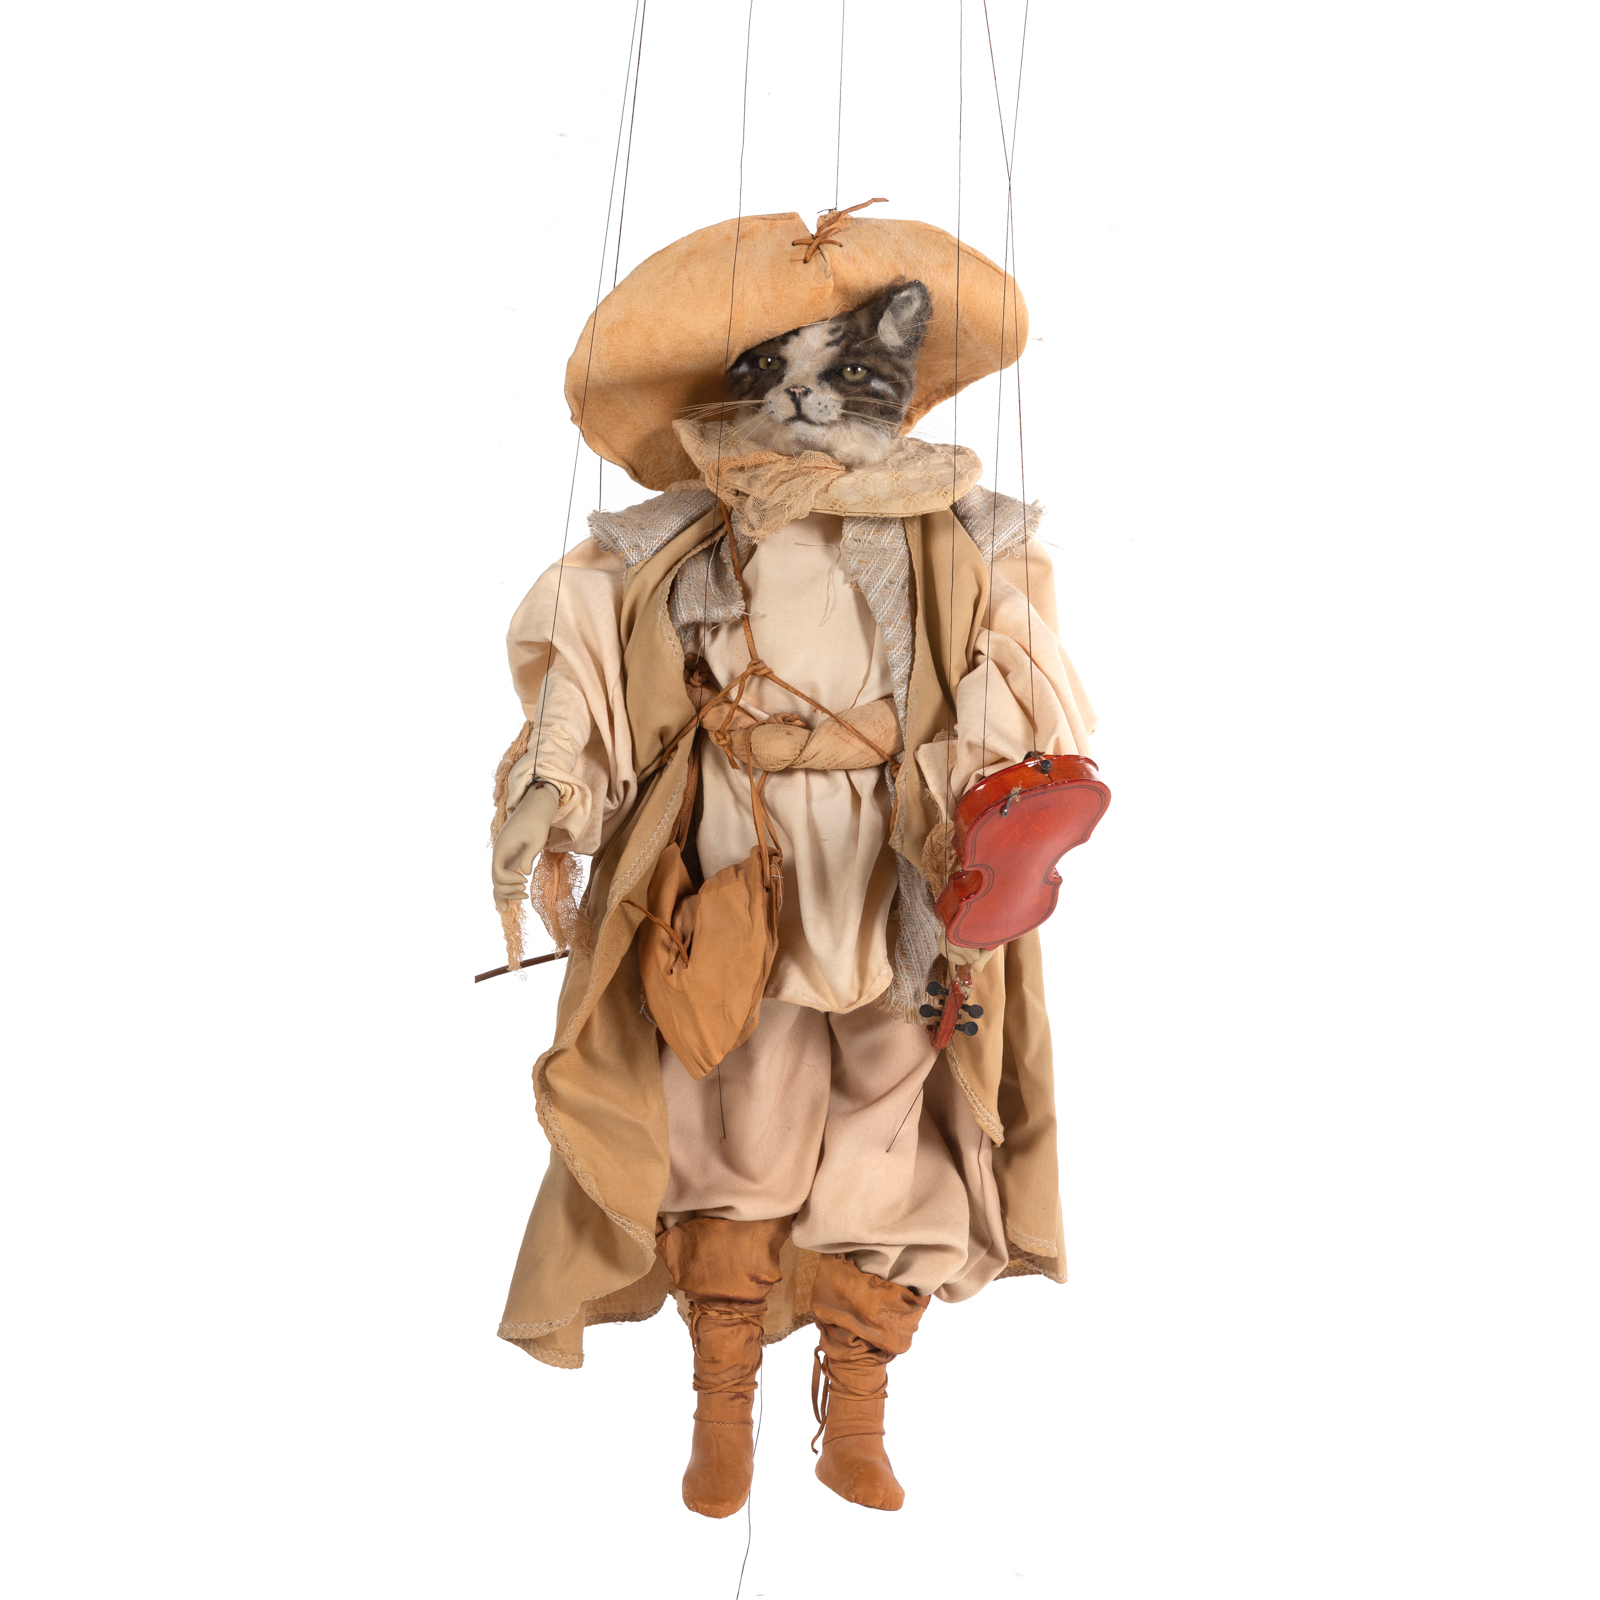 FRENCH "PUSS IN BOOTS" MARIONETTE